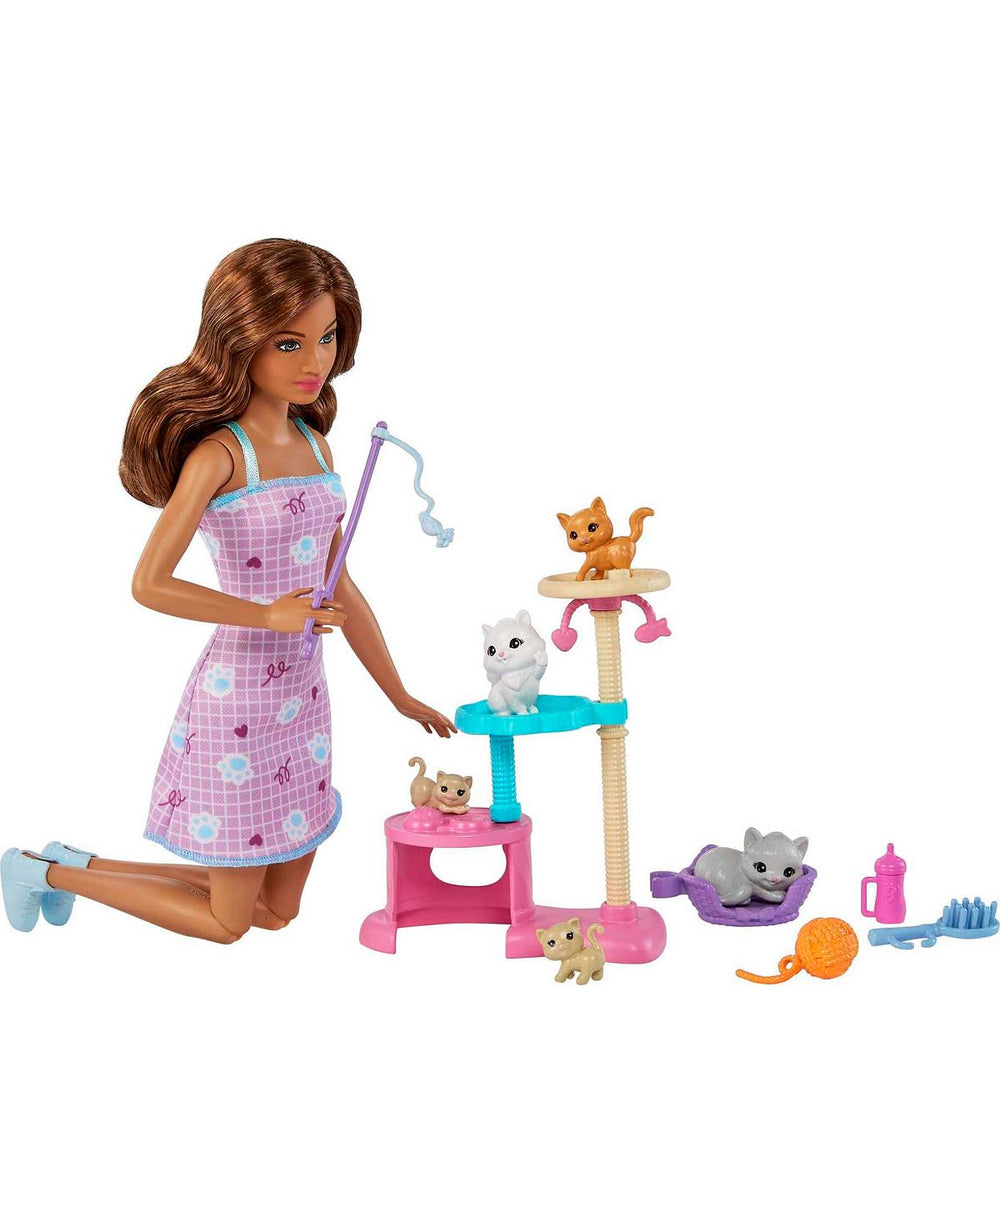 Barbie Kitty Condo Playset with Doll, Pets, and Accessories